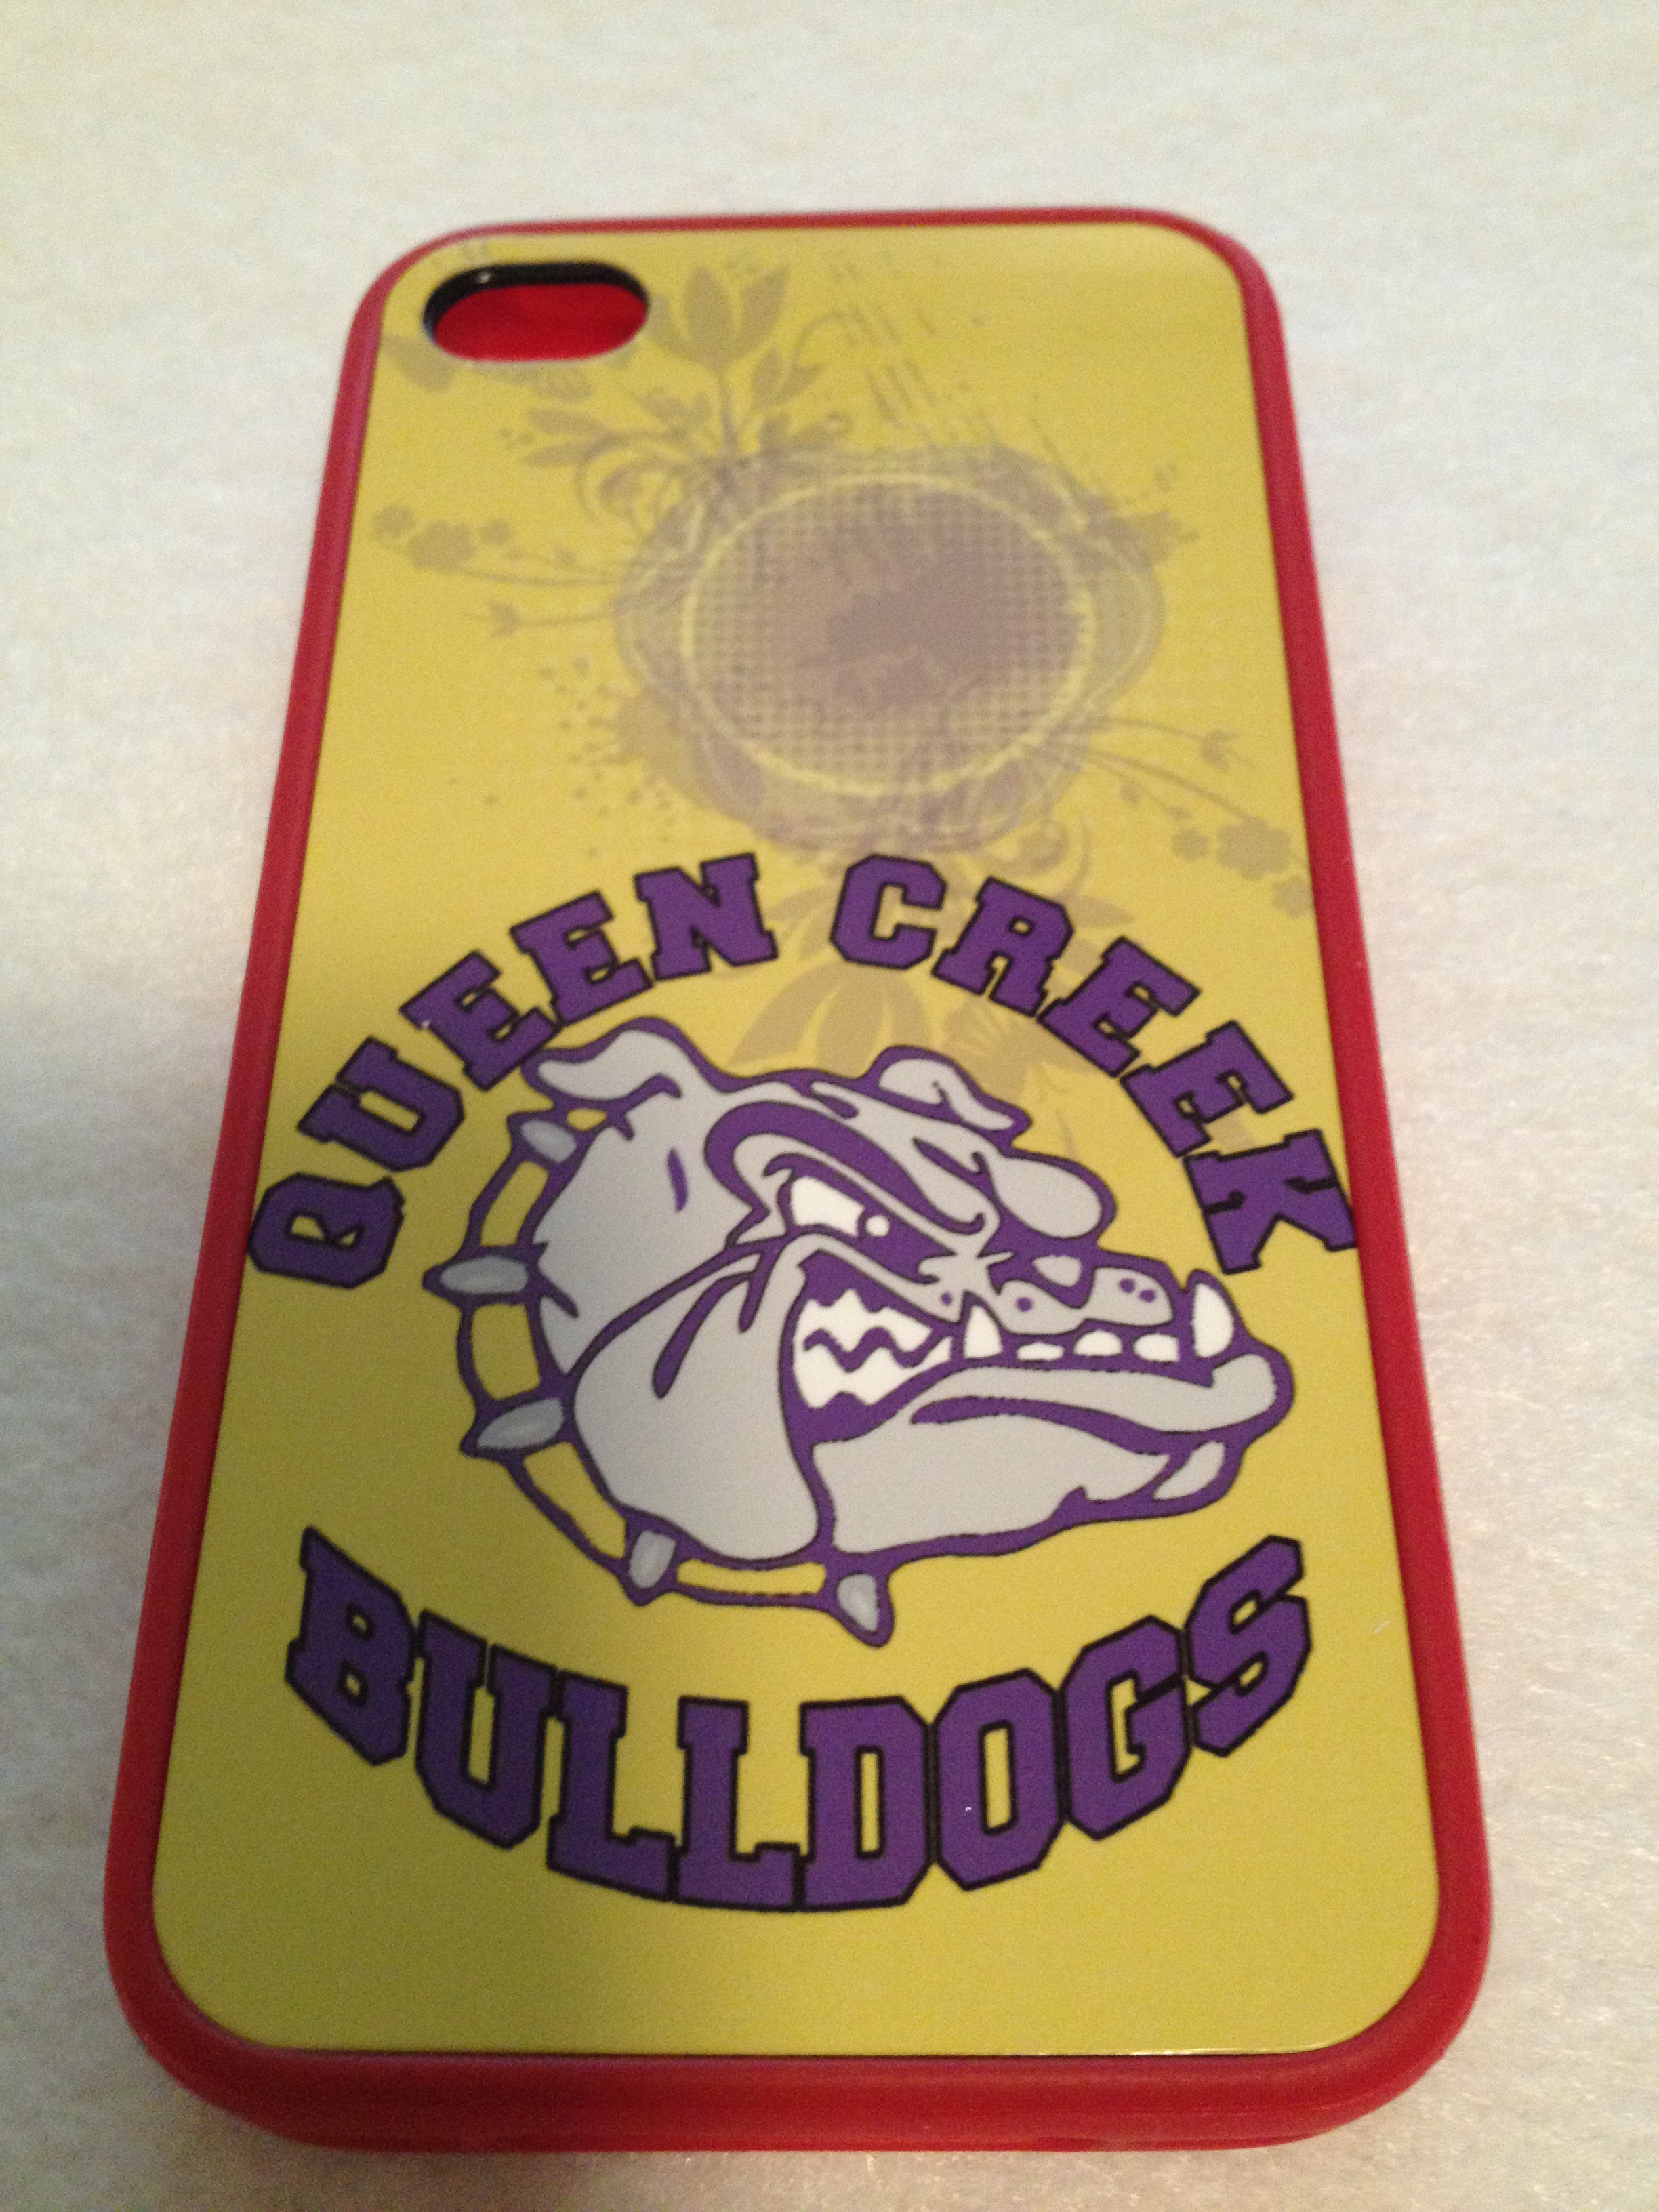 I Phone Cover made with sublimation printing